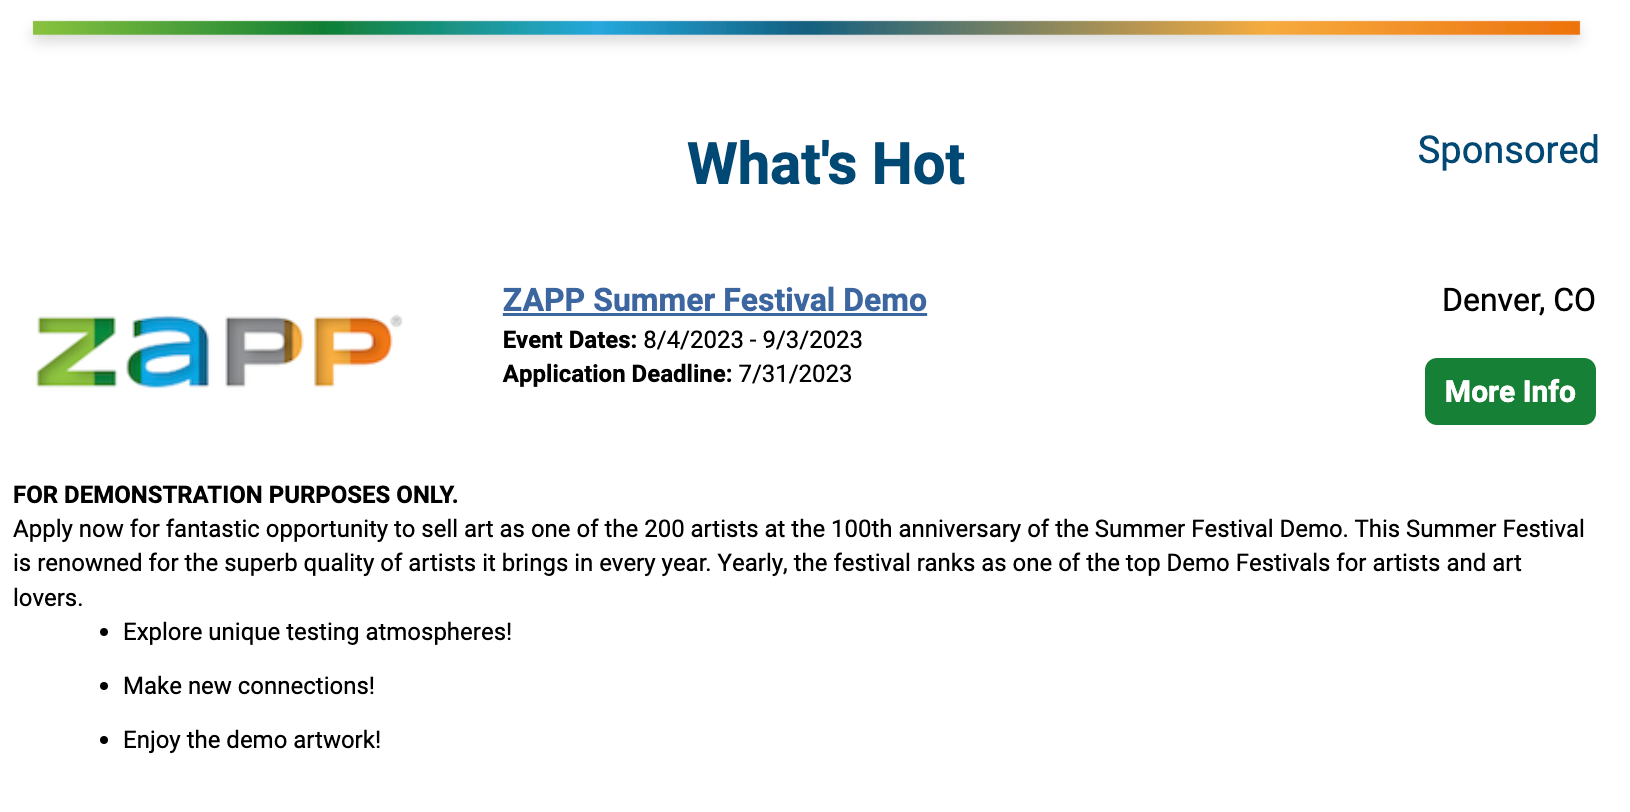 screenshot of the section of the ZAPP Show Information email titled "What's Hot" with event information for the featured event 